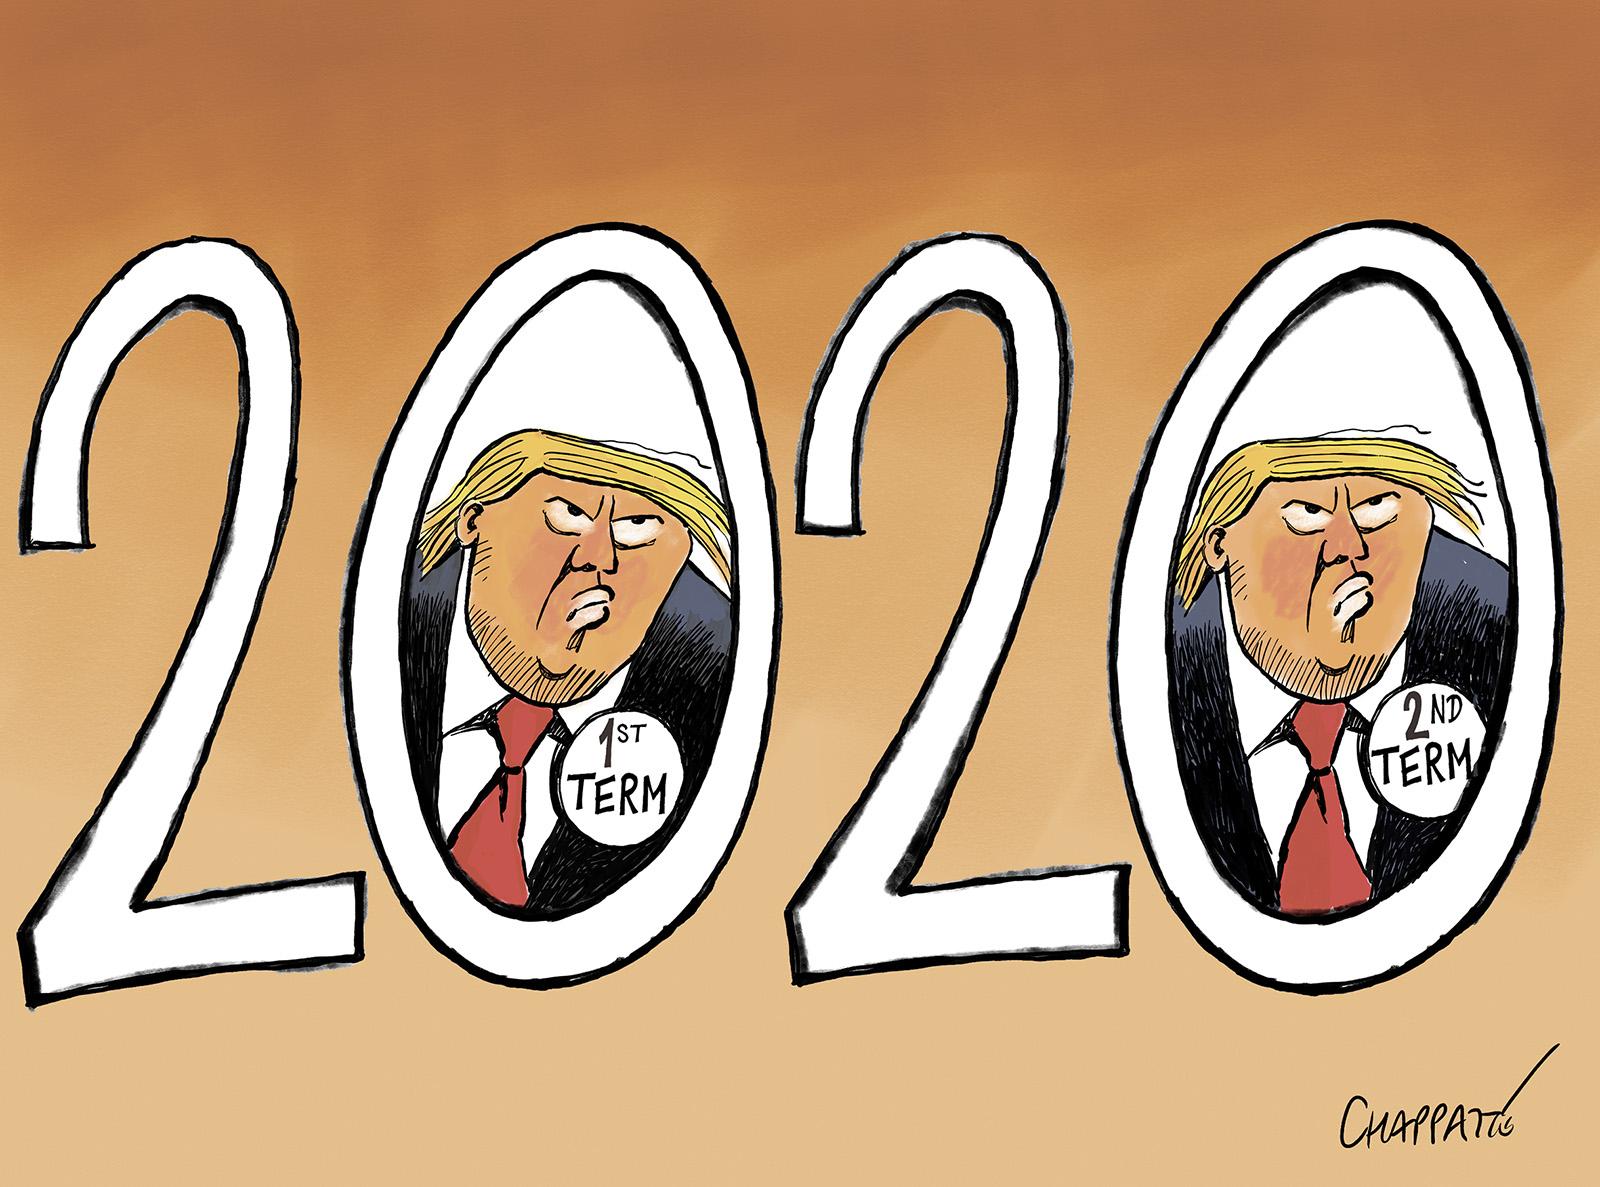 Here comes 2020!